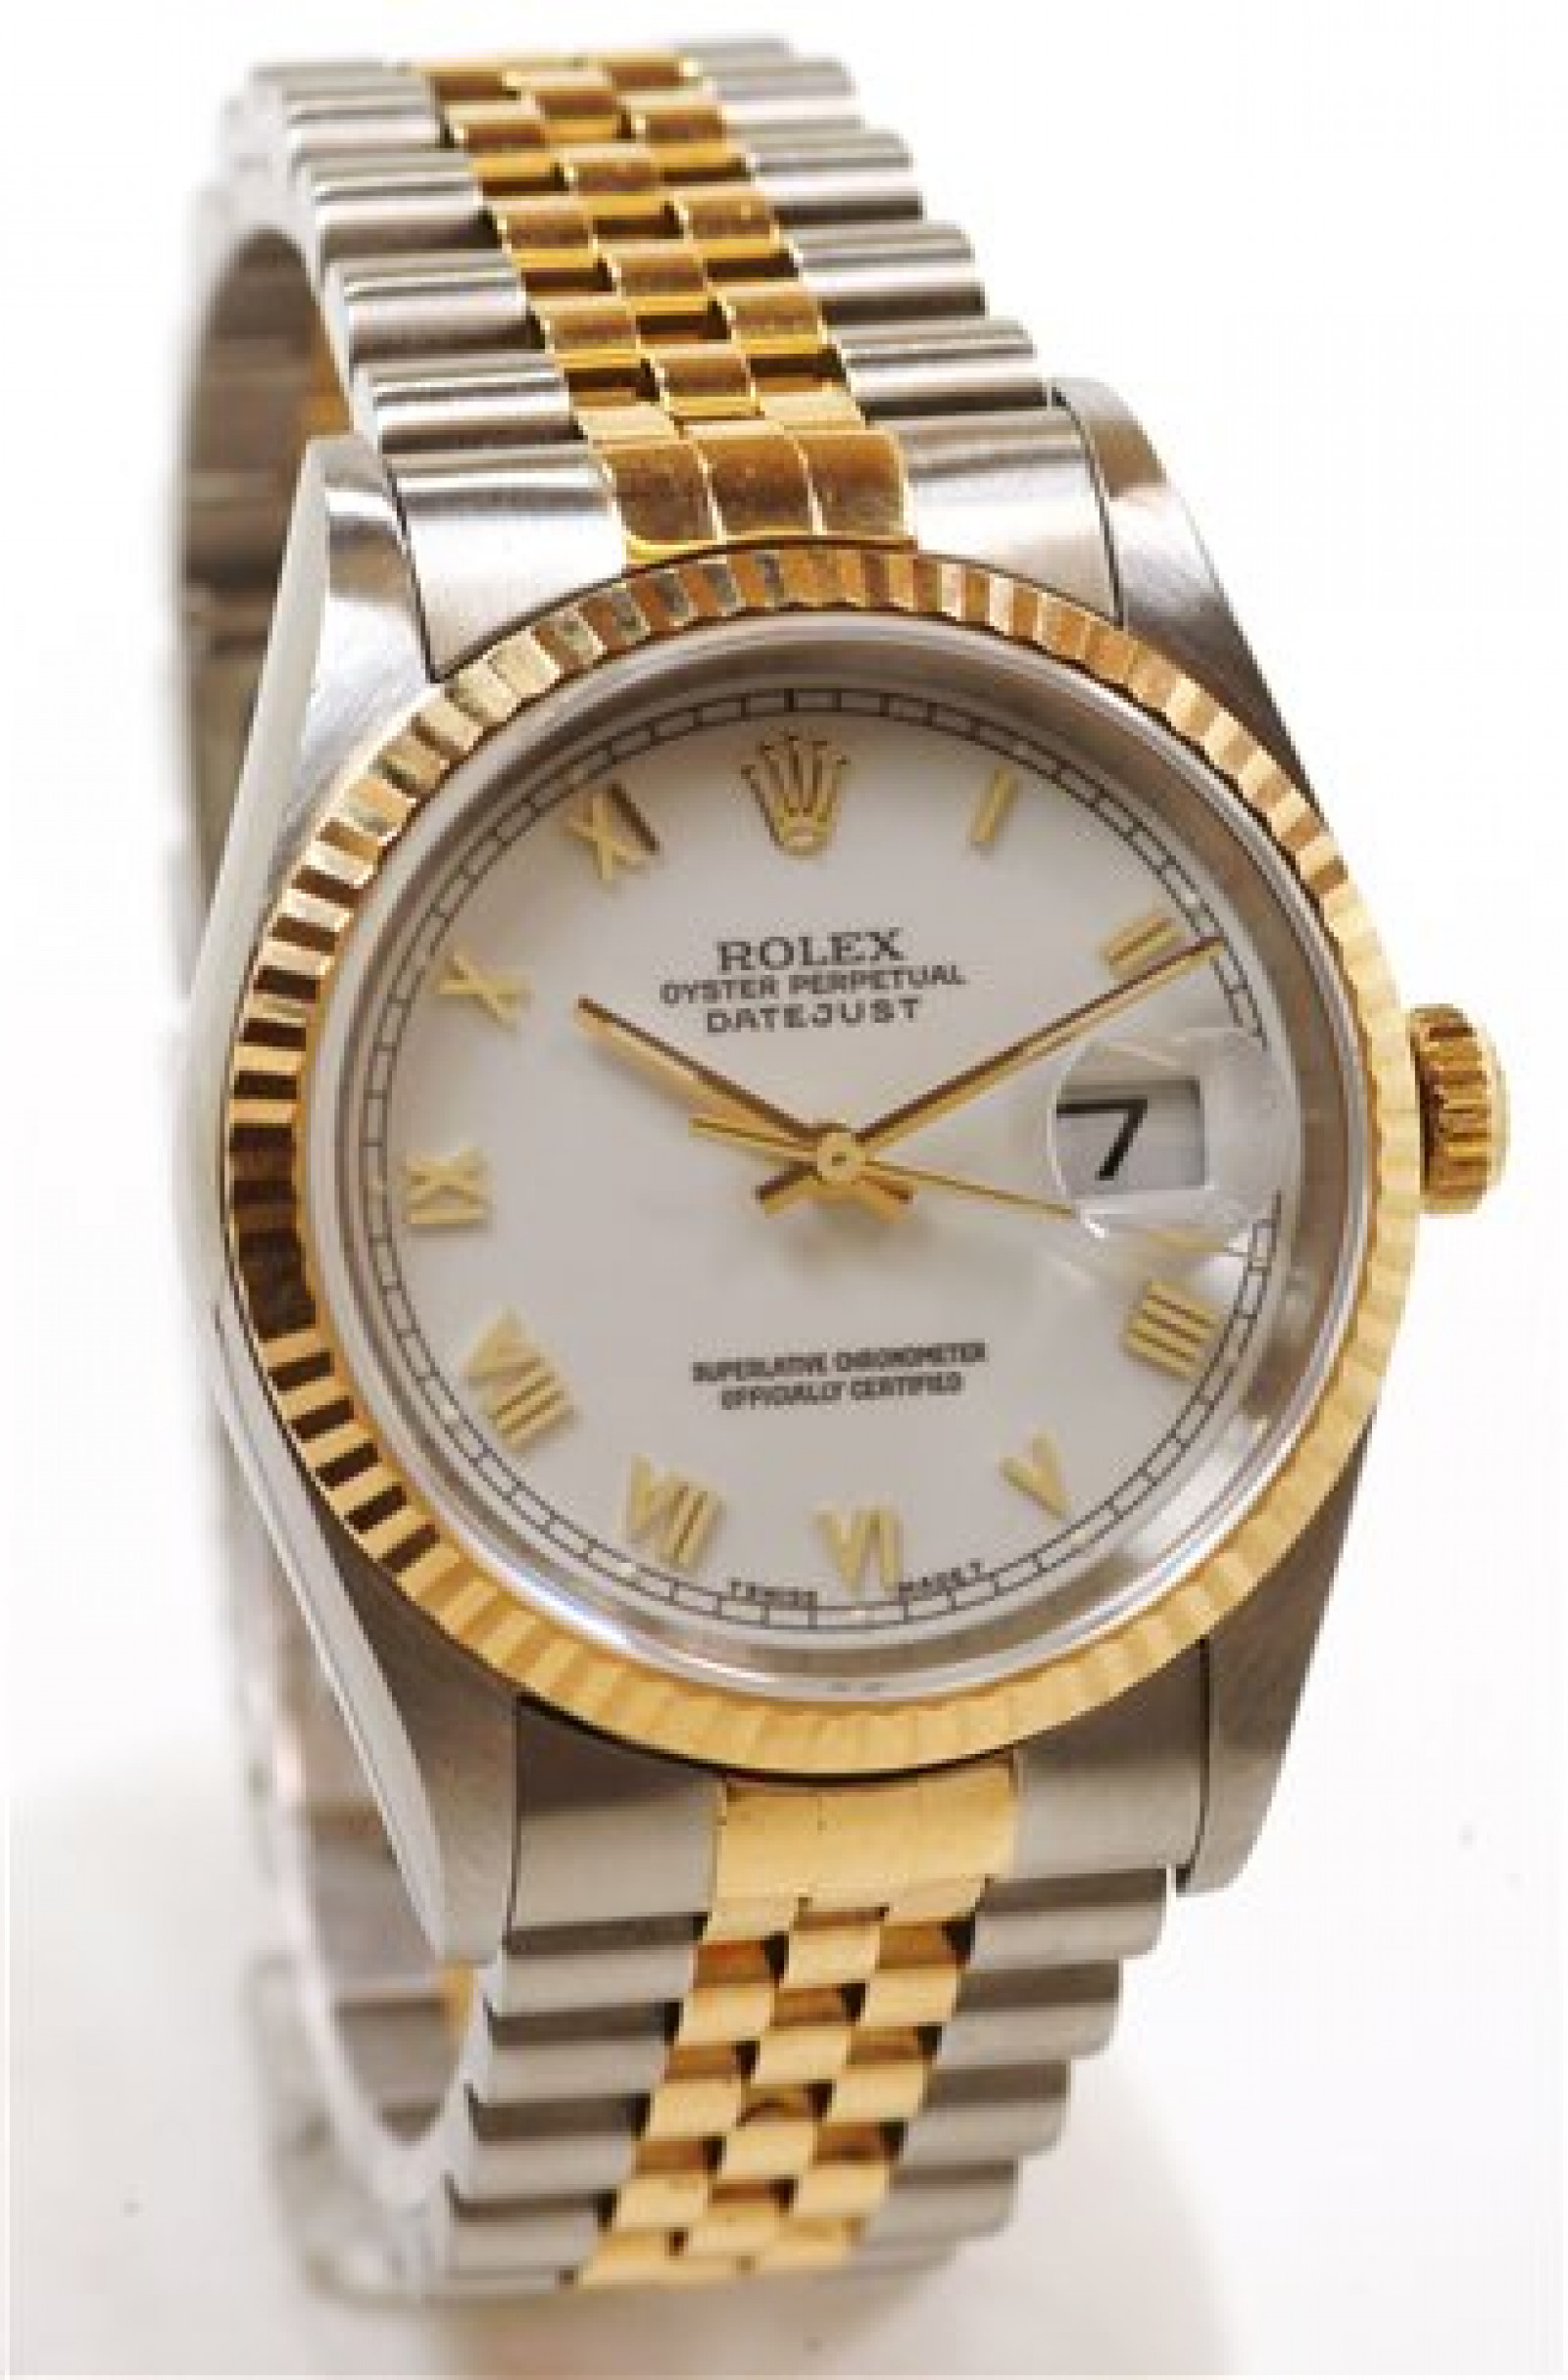 Rolex Datejust 16233 with 18 kt Yellow Gold